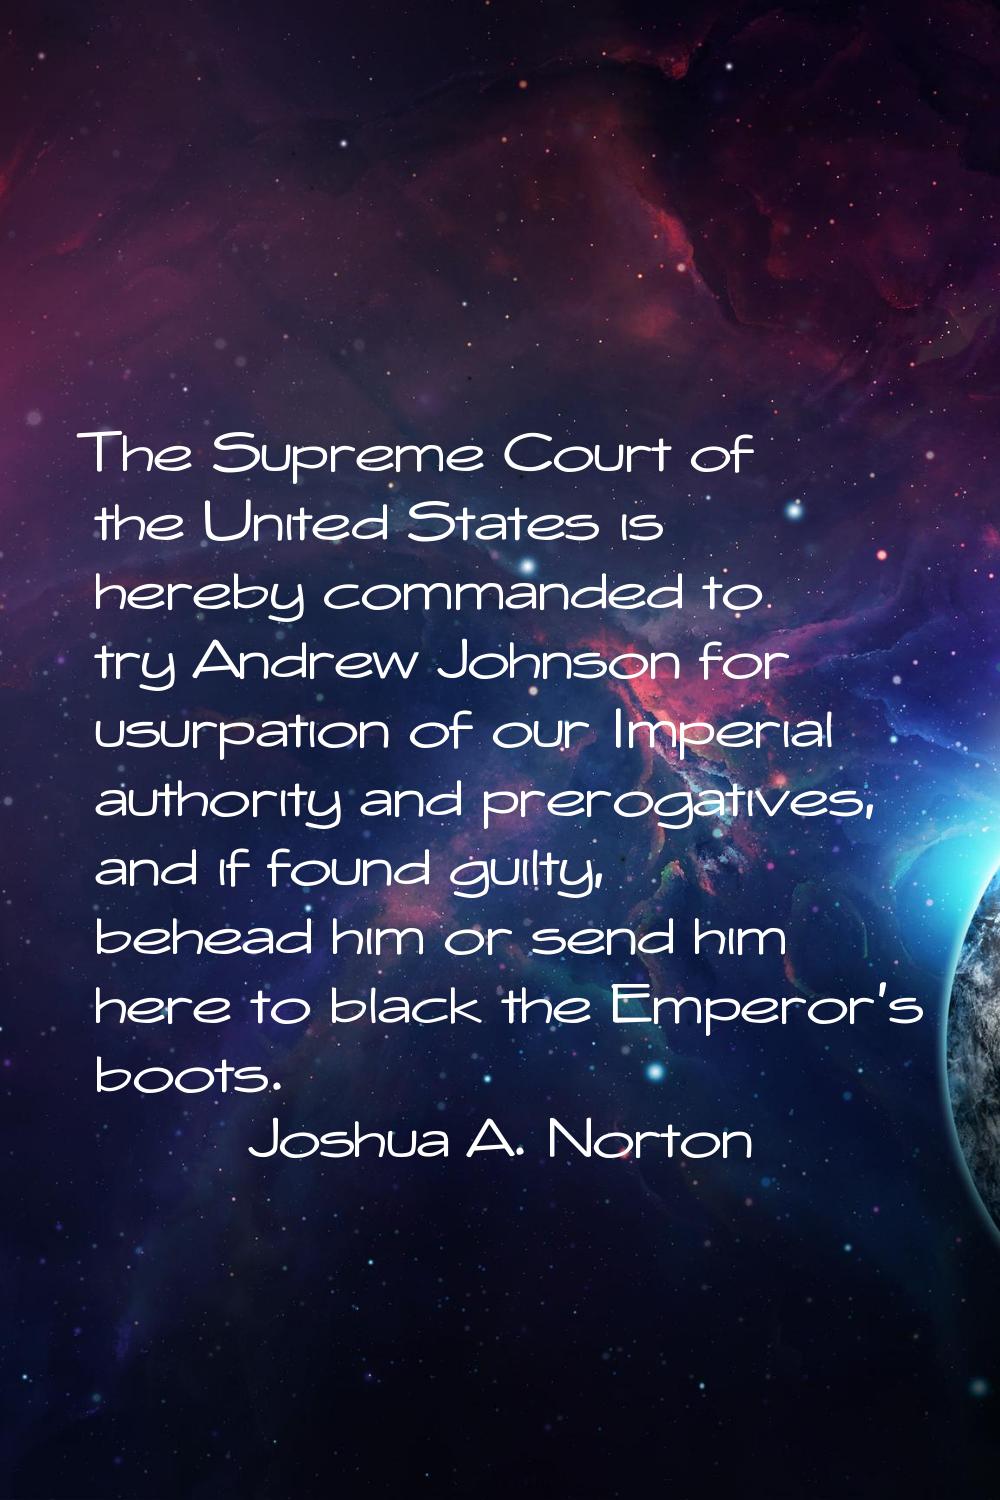 The Supreme Court of the United States is hereby commanded to try Andrew Johnson for usurpation of 